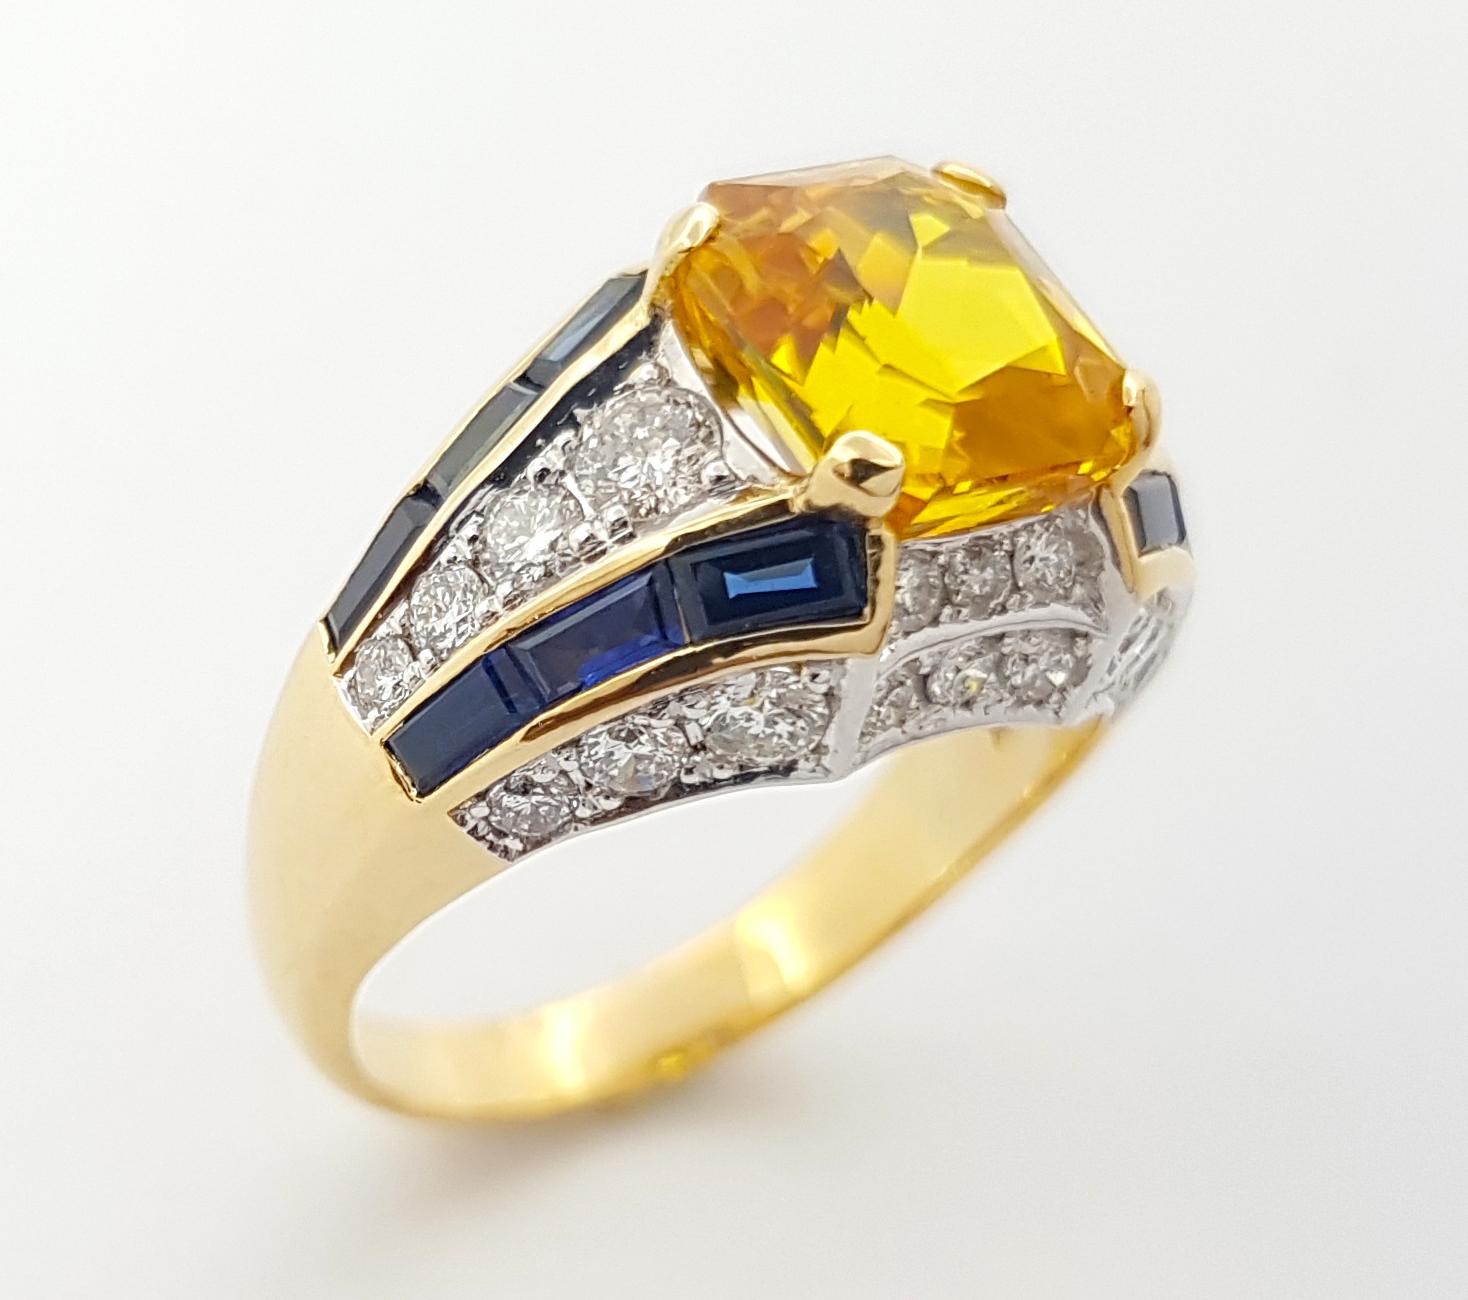 Yellow Sapphire with Blue Sapphire and Diamond Ring set in 18K Yellow/White Gold For Sale 6